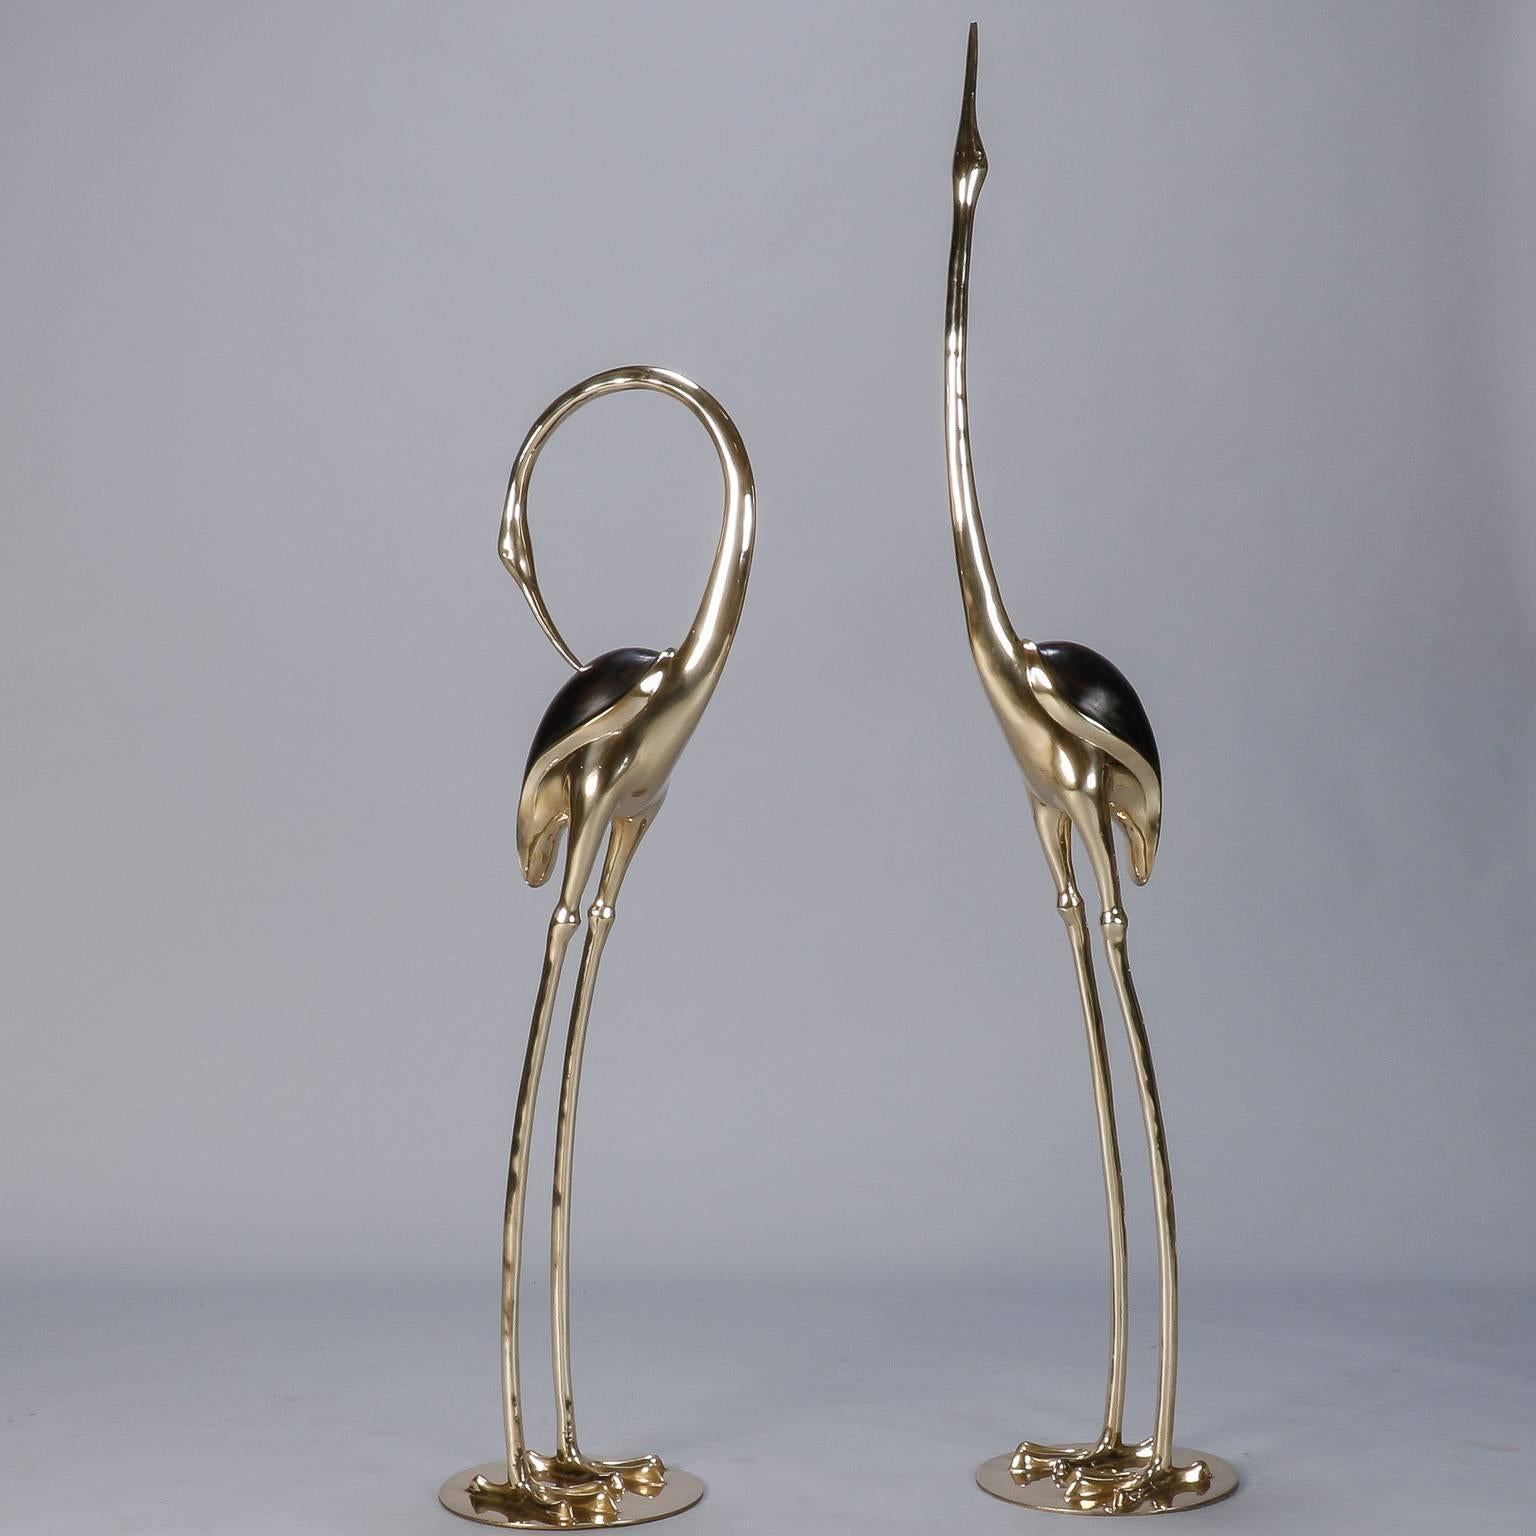 Found in Belgium, this circa 1970s very tall pair of solid polished brass herons or cranes has a lot of visual impact. The taller crane with the outstretched neck is 70” high and the other is 54” tall. The brass on the bird’s backs has a dark stain